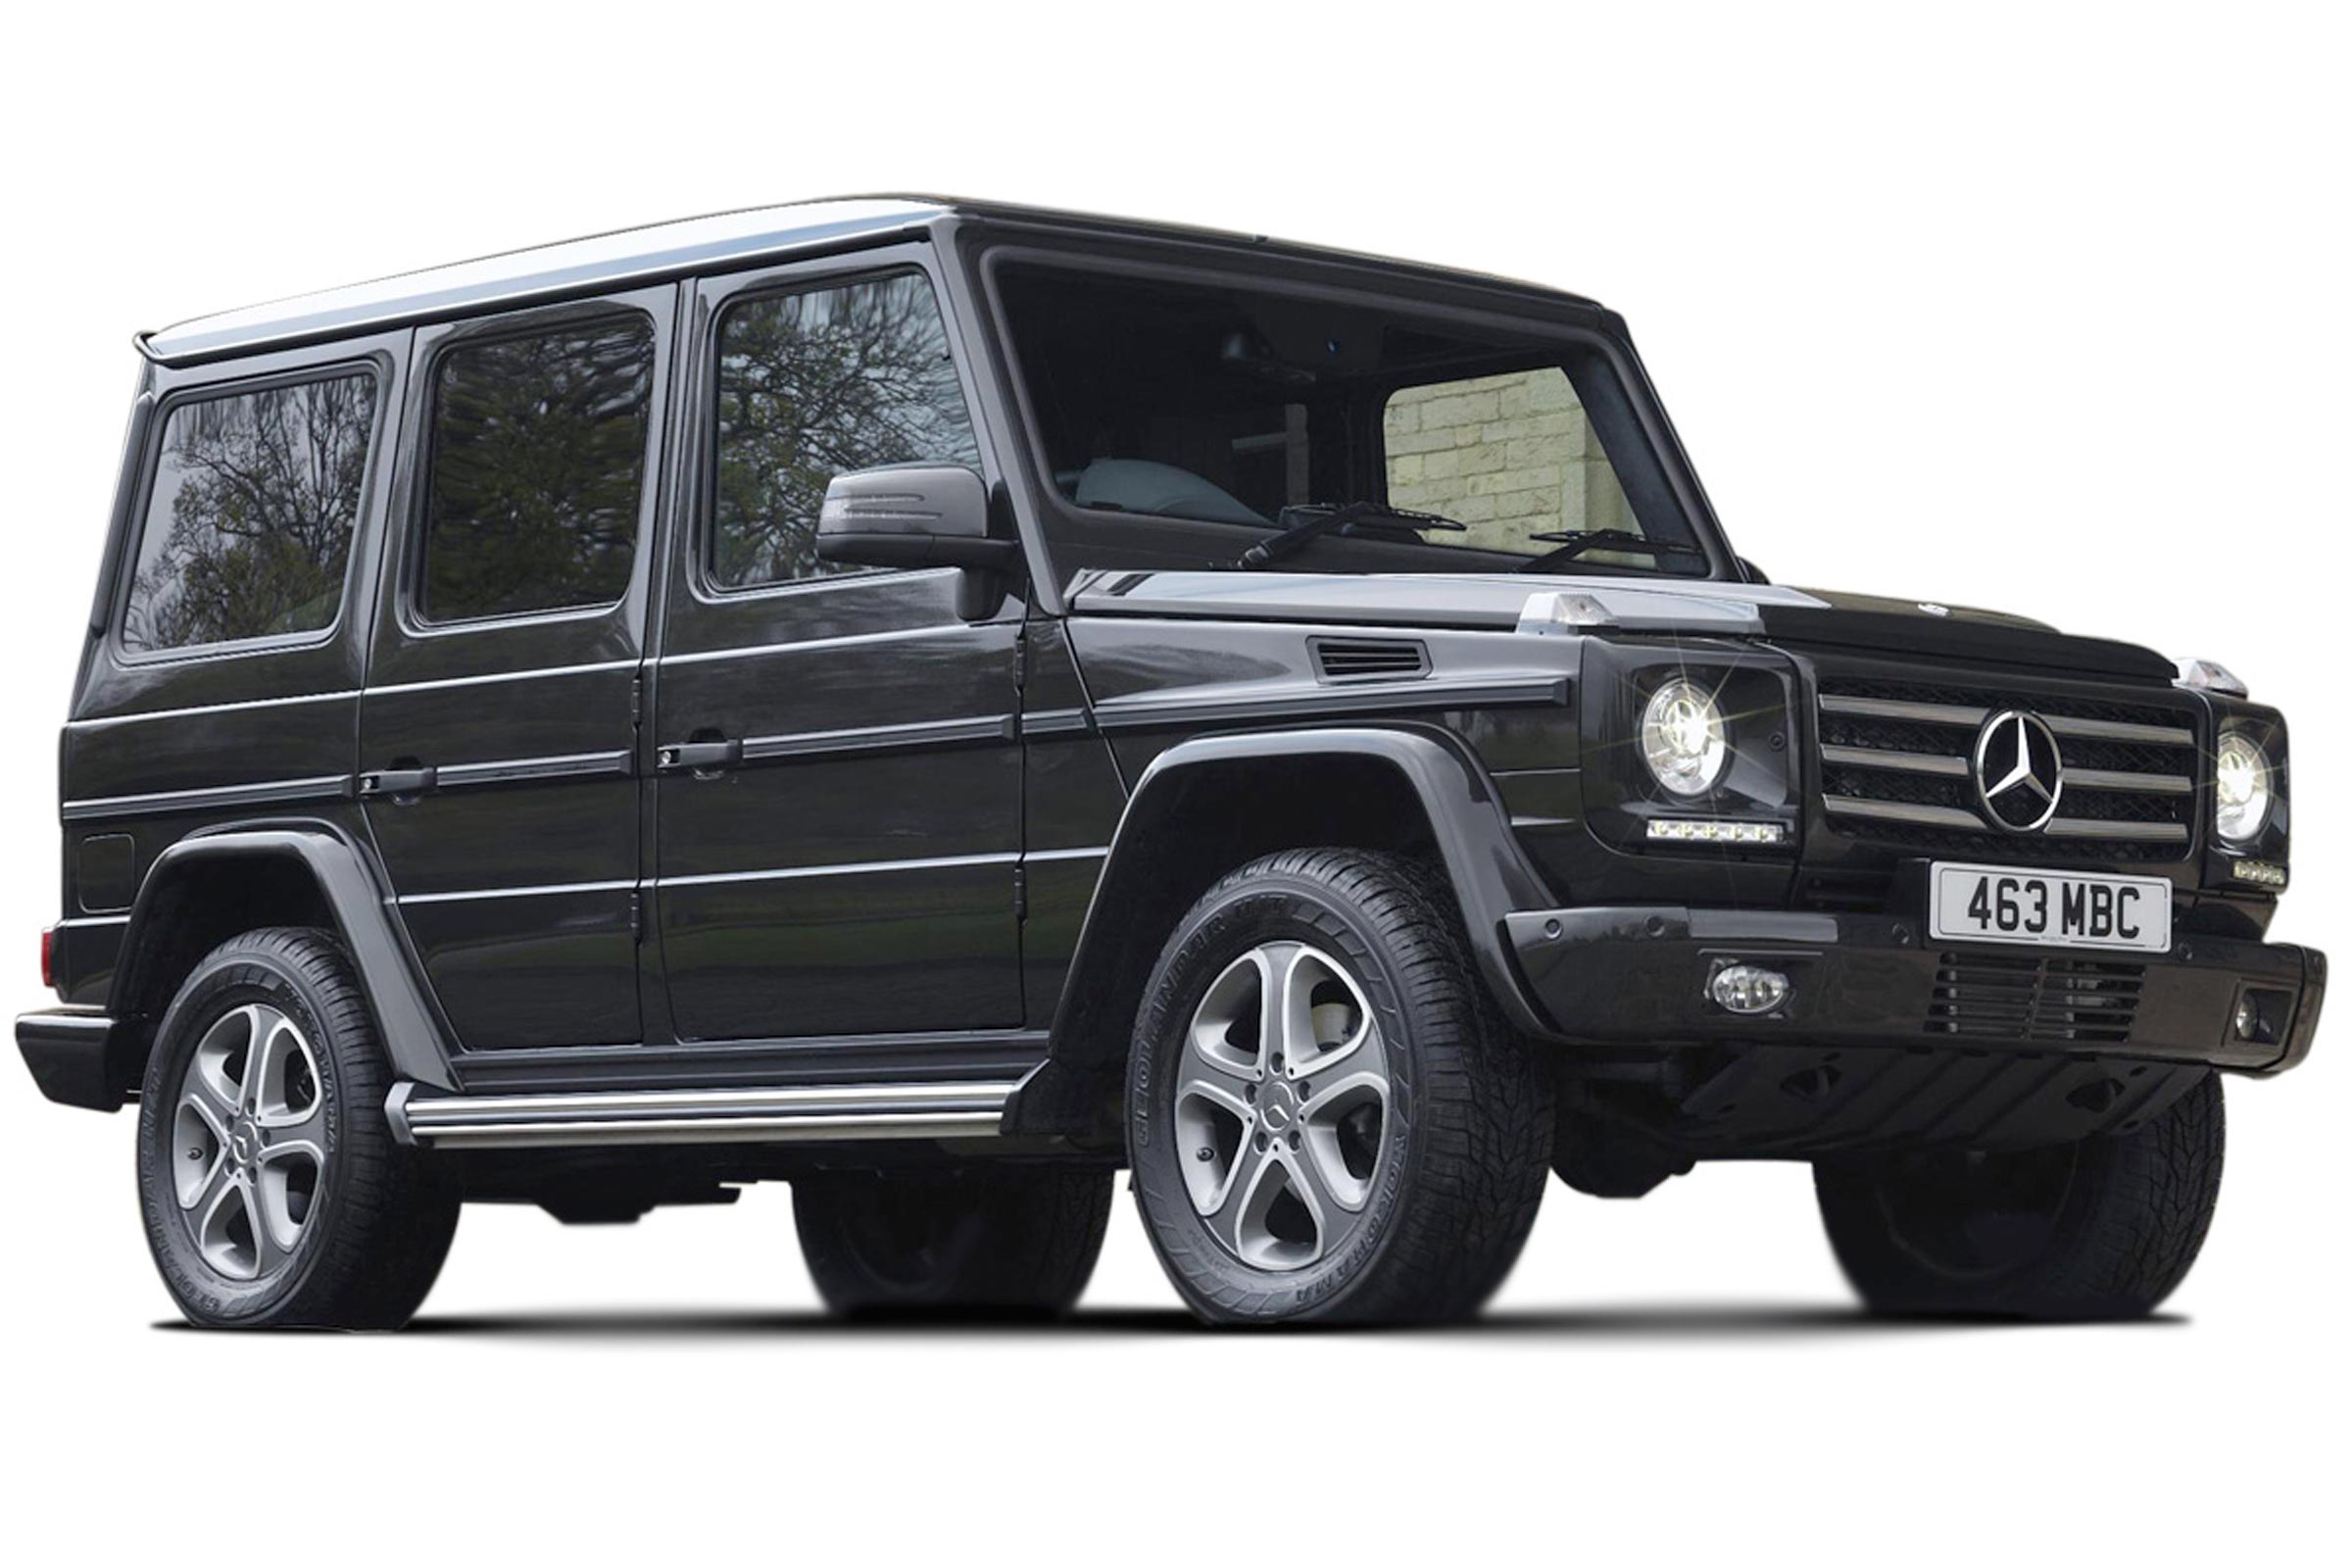 Mercedes G Class Suv 1990 18 Carbuyer